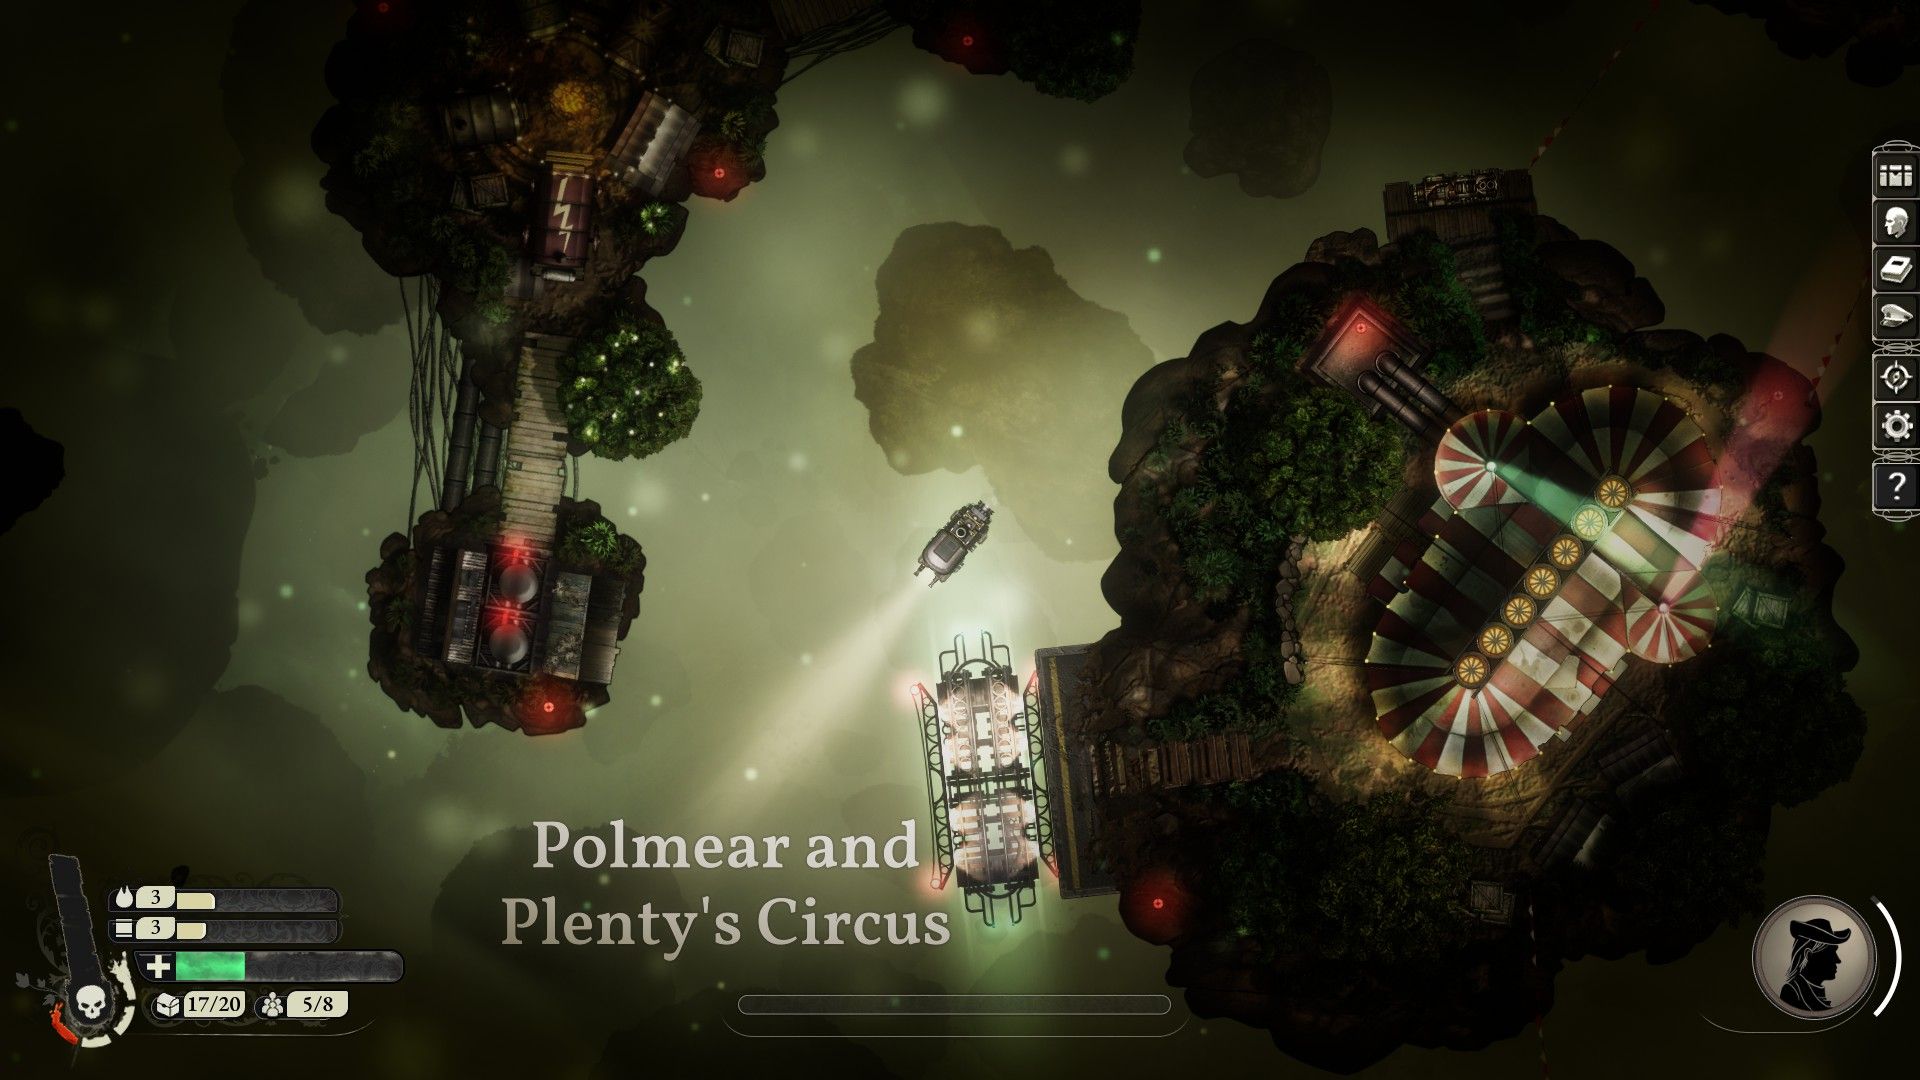 Sunless Skies - A sky ship is docked at Plenty's Circus